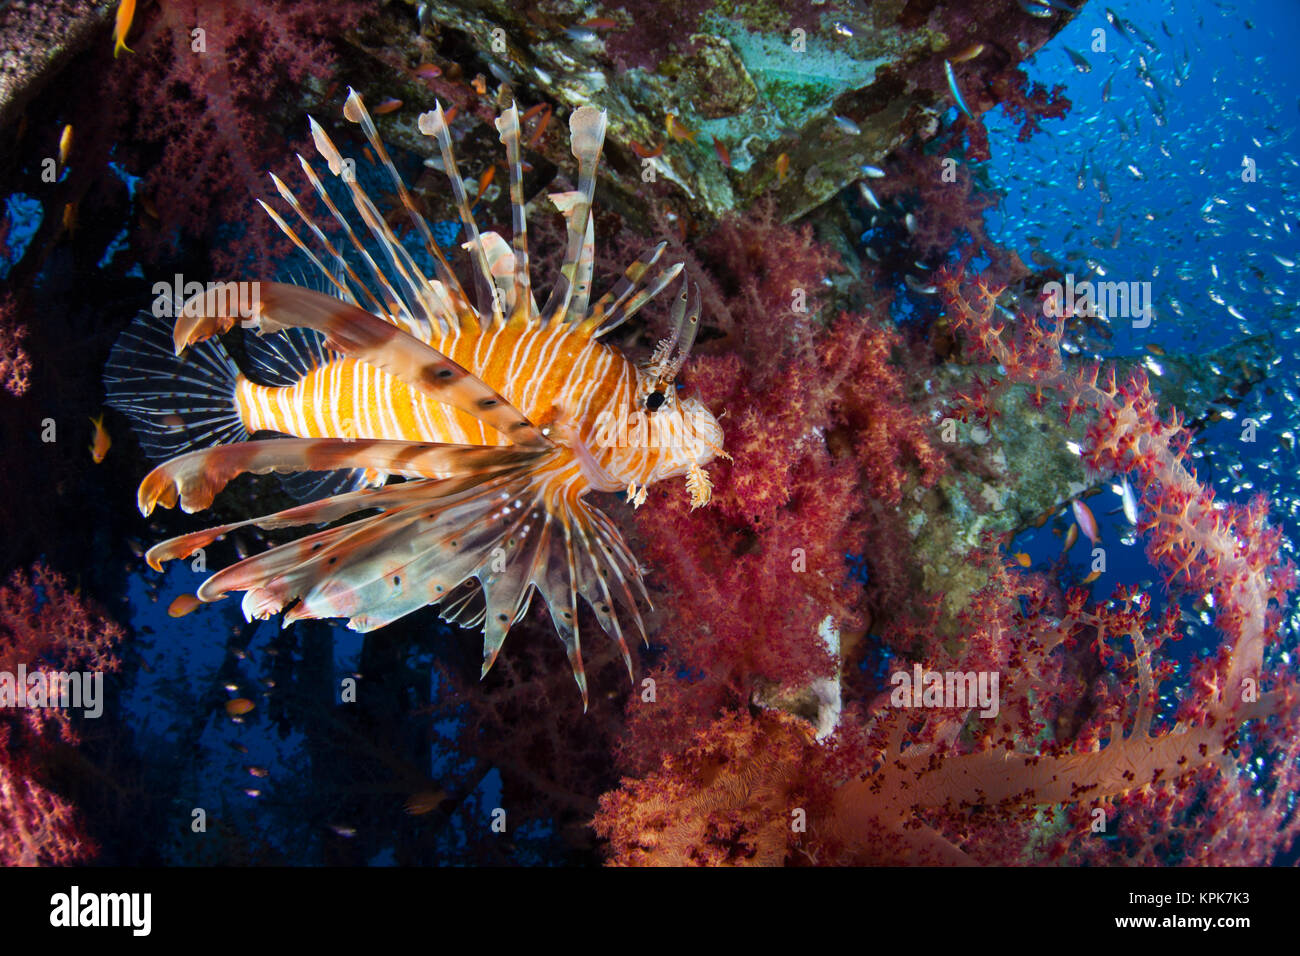 Common Lionfish and Dendronepthya. The habitat is a ship wreck. Stock Photo